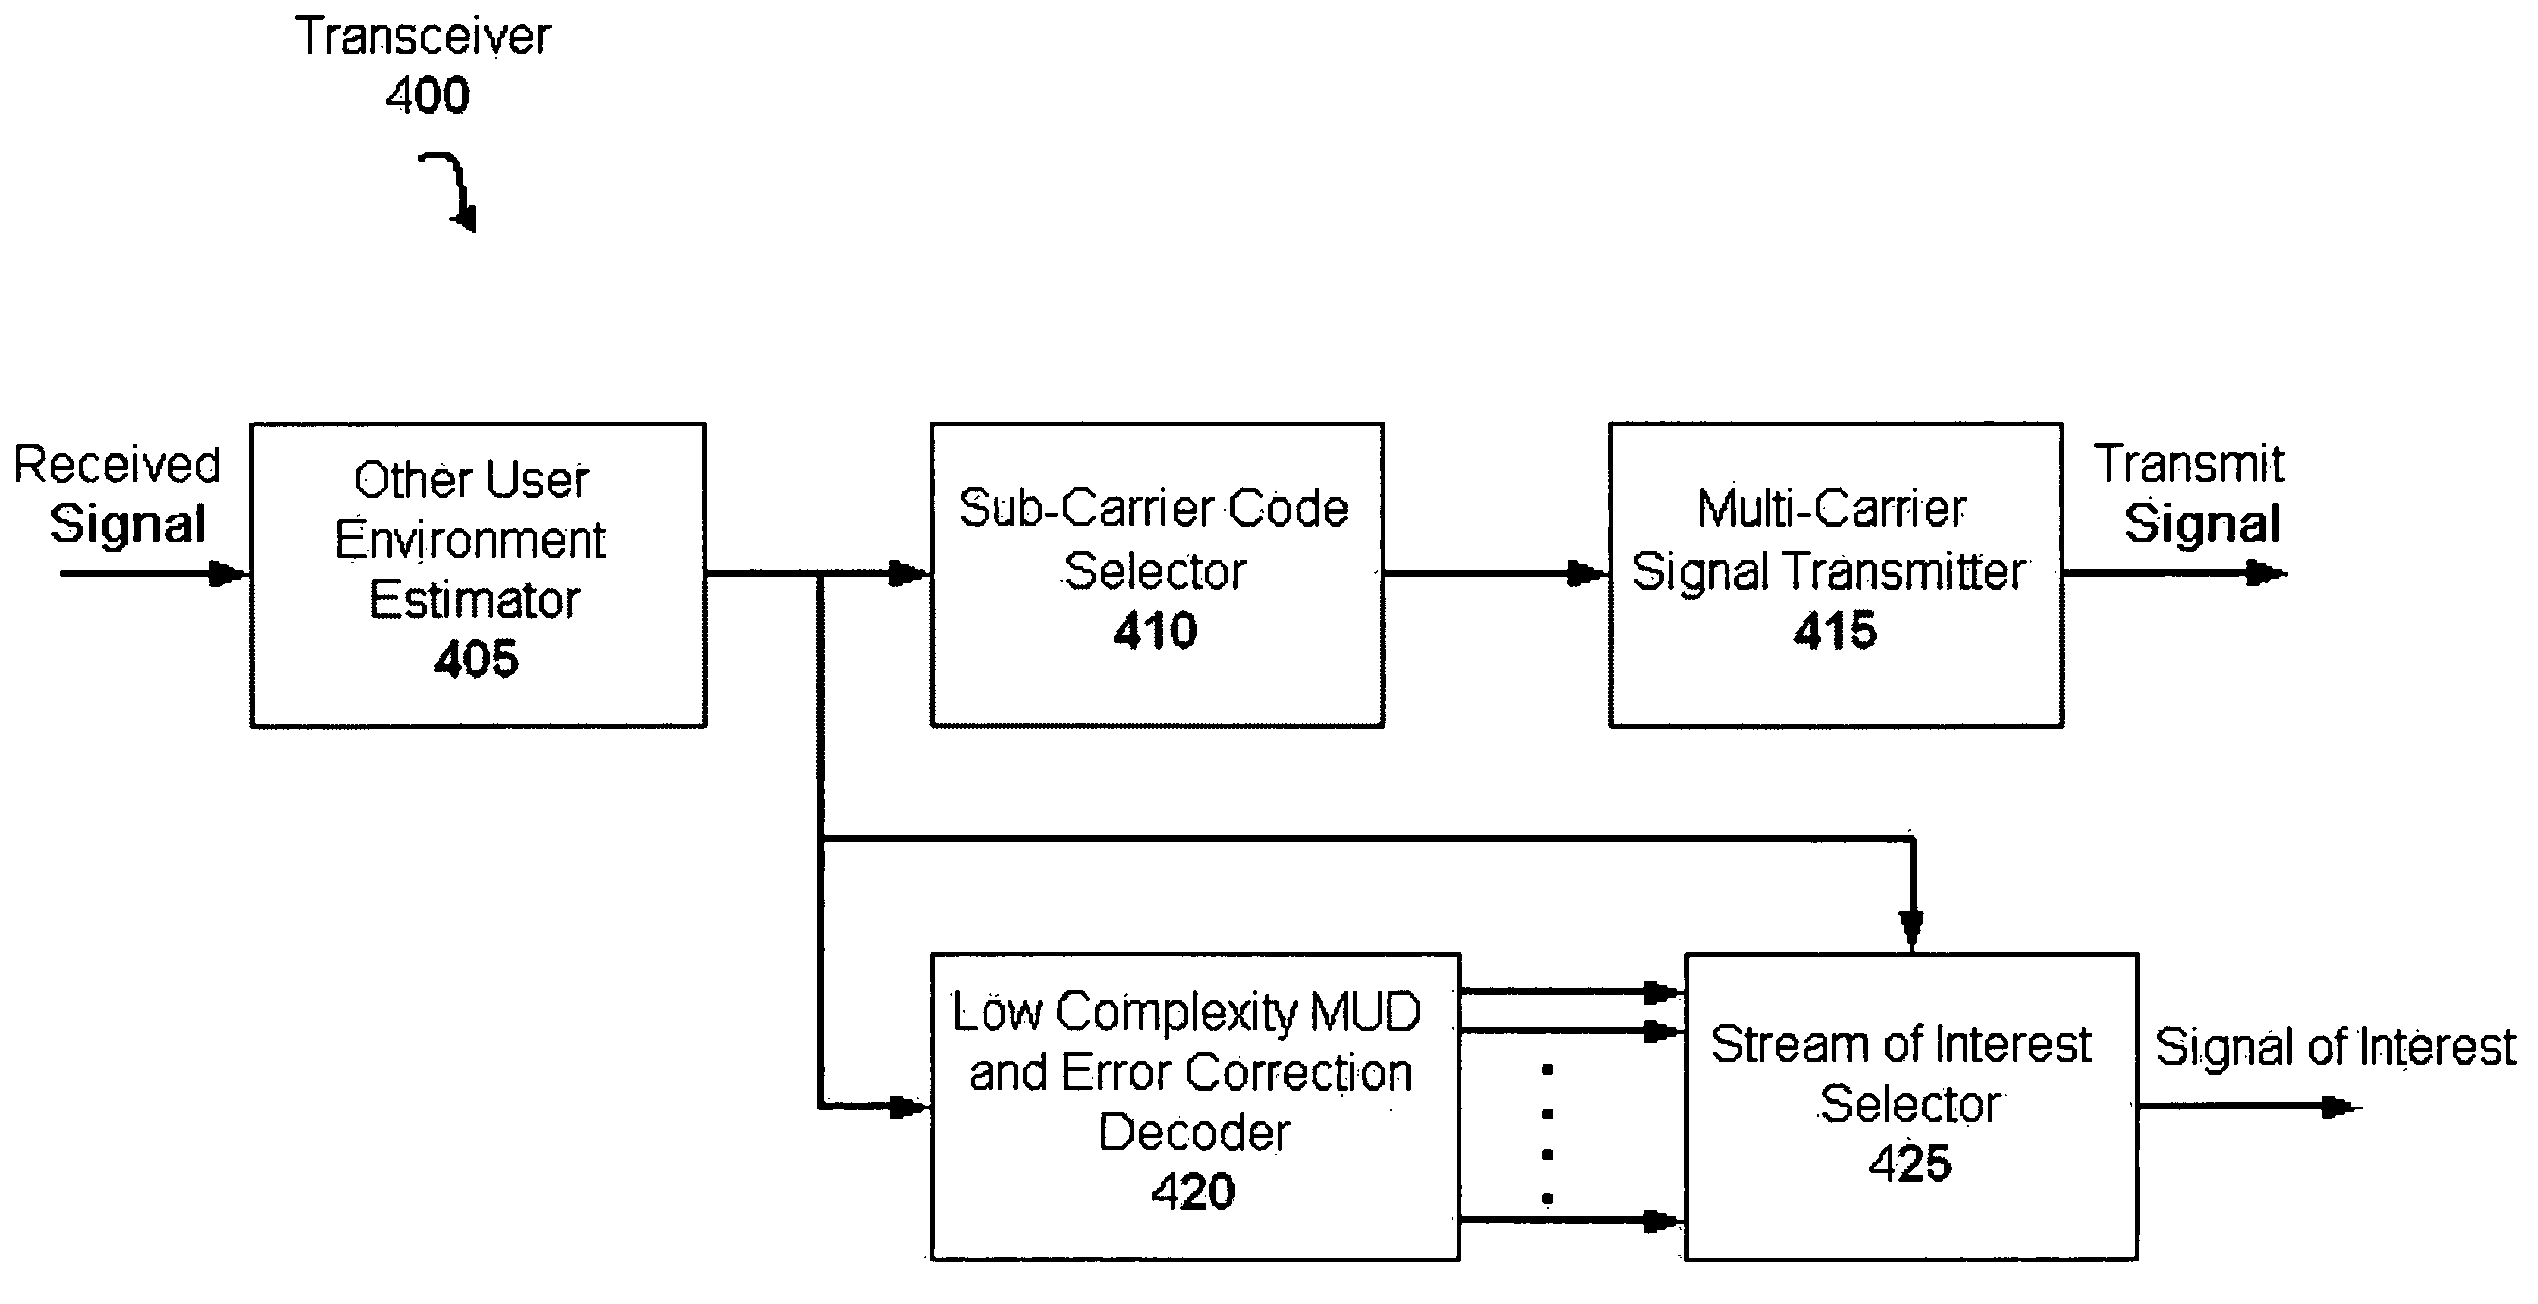 Tree structured multicarrier multiple access systems